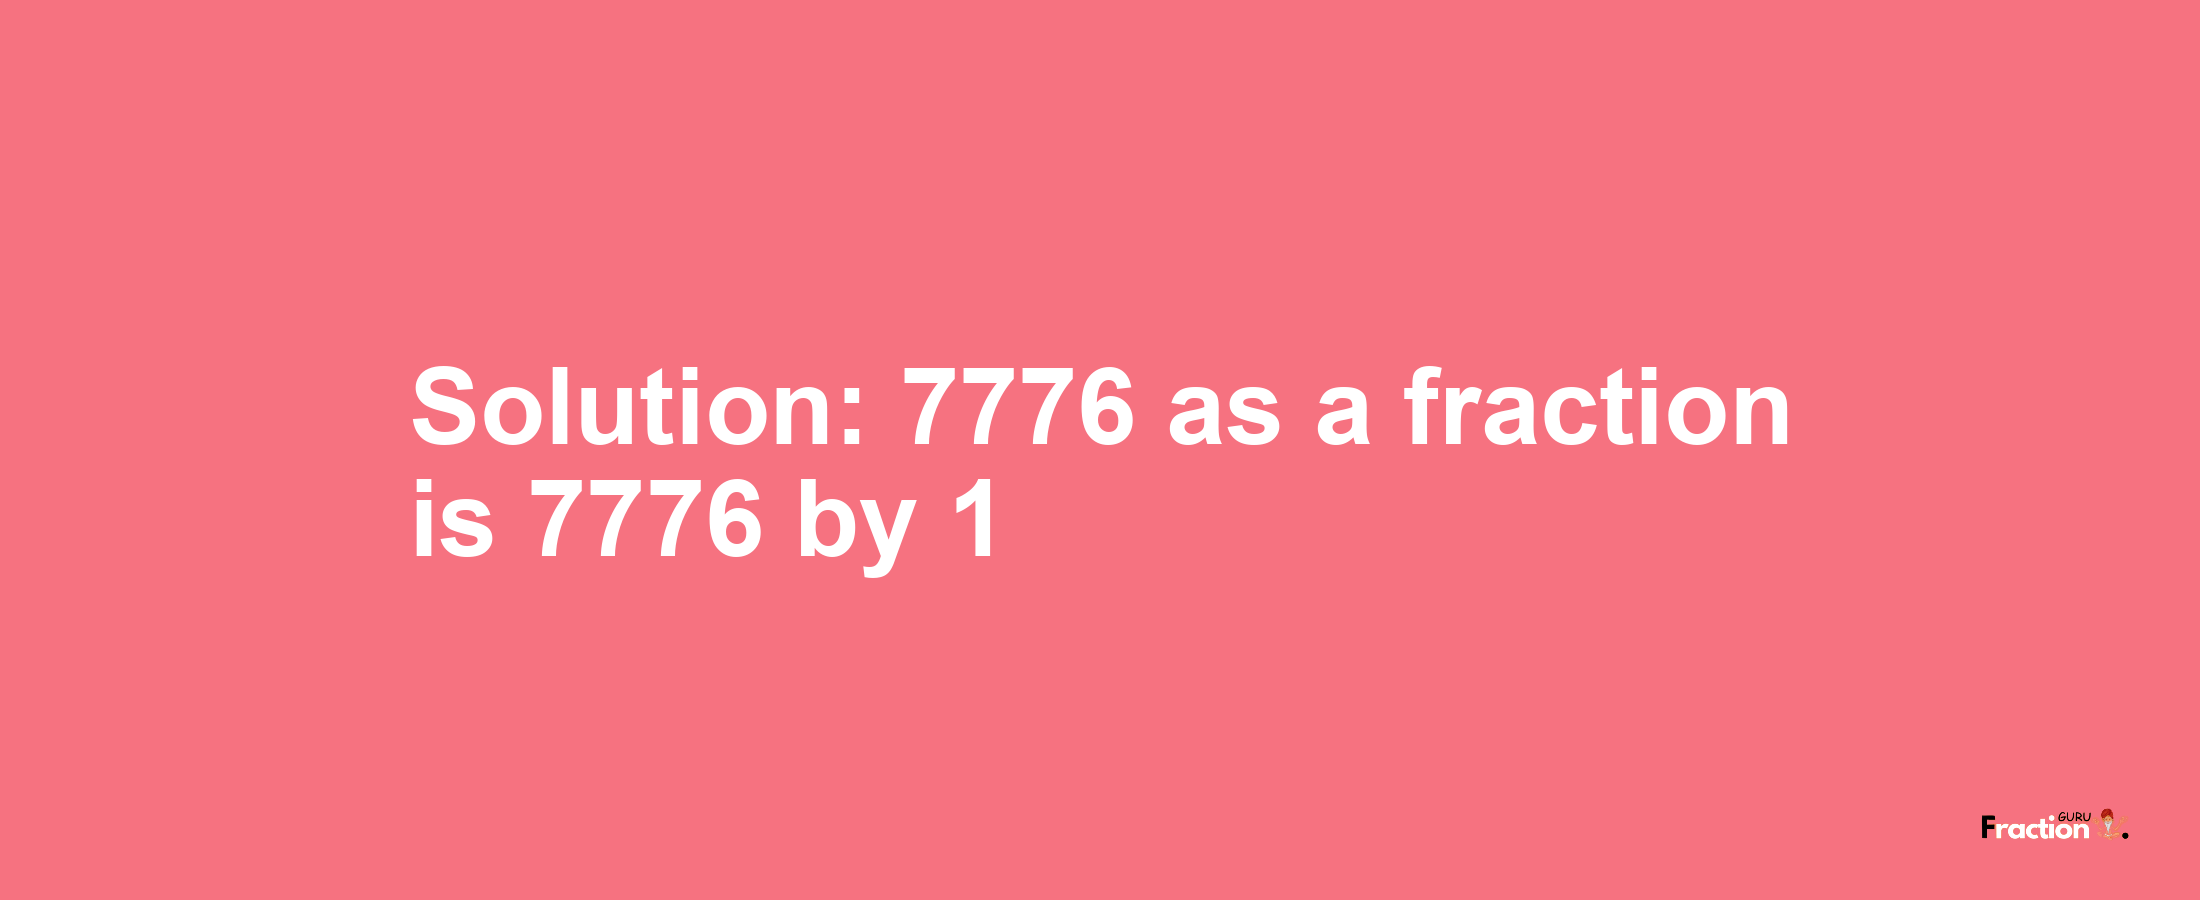 Solution:7776 as a fraction is 7776/1